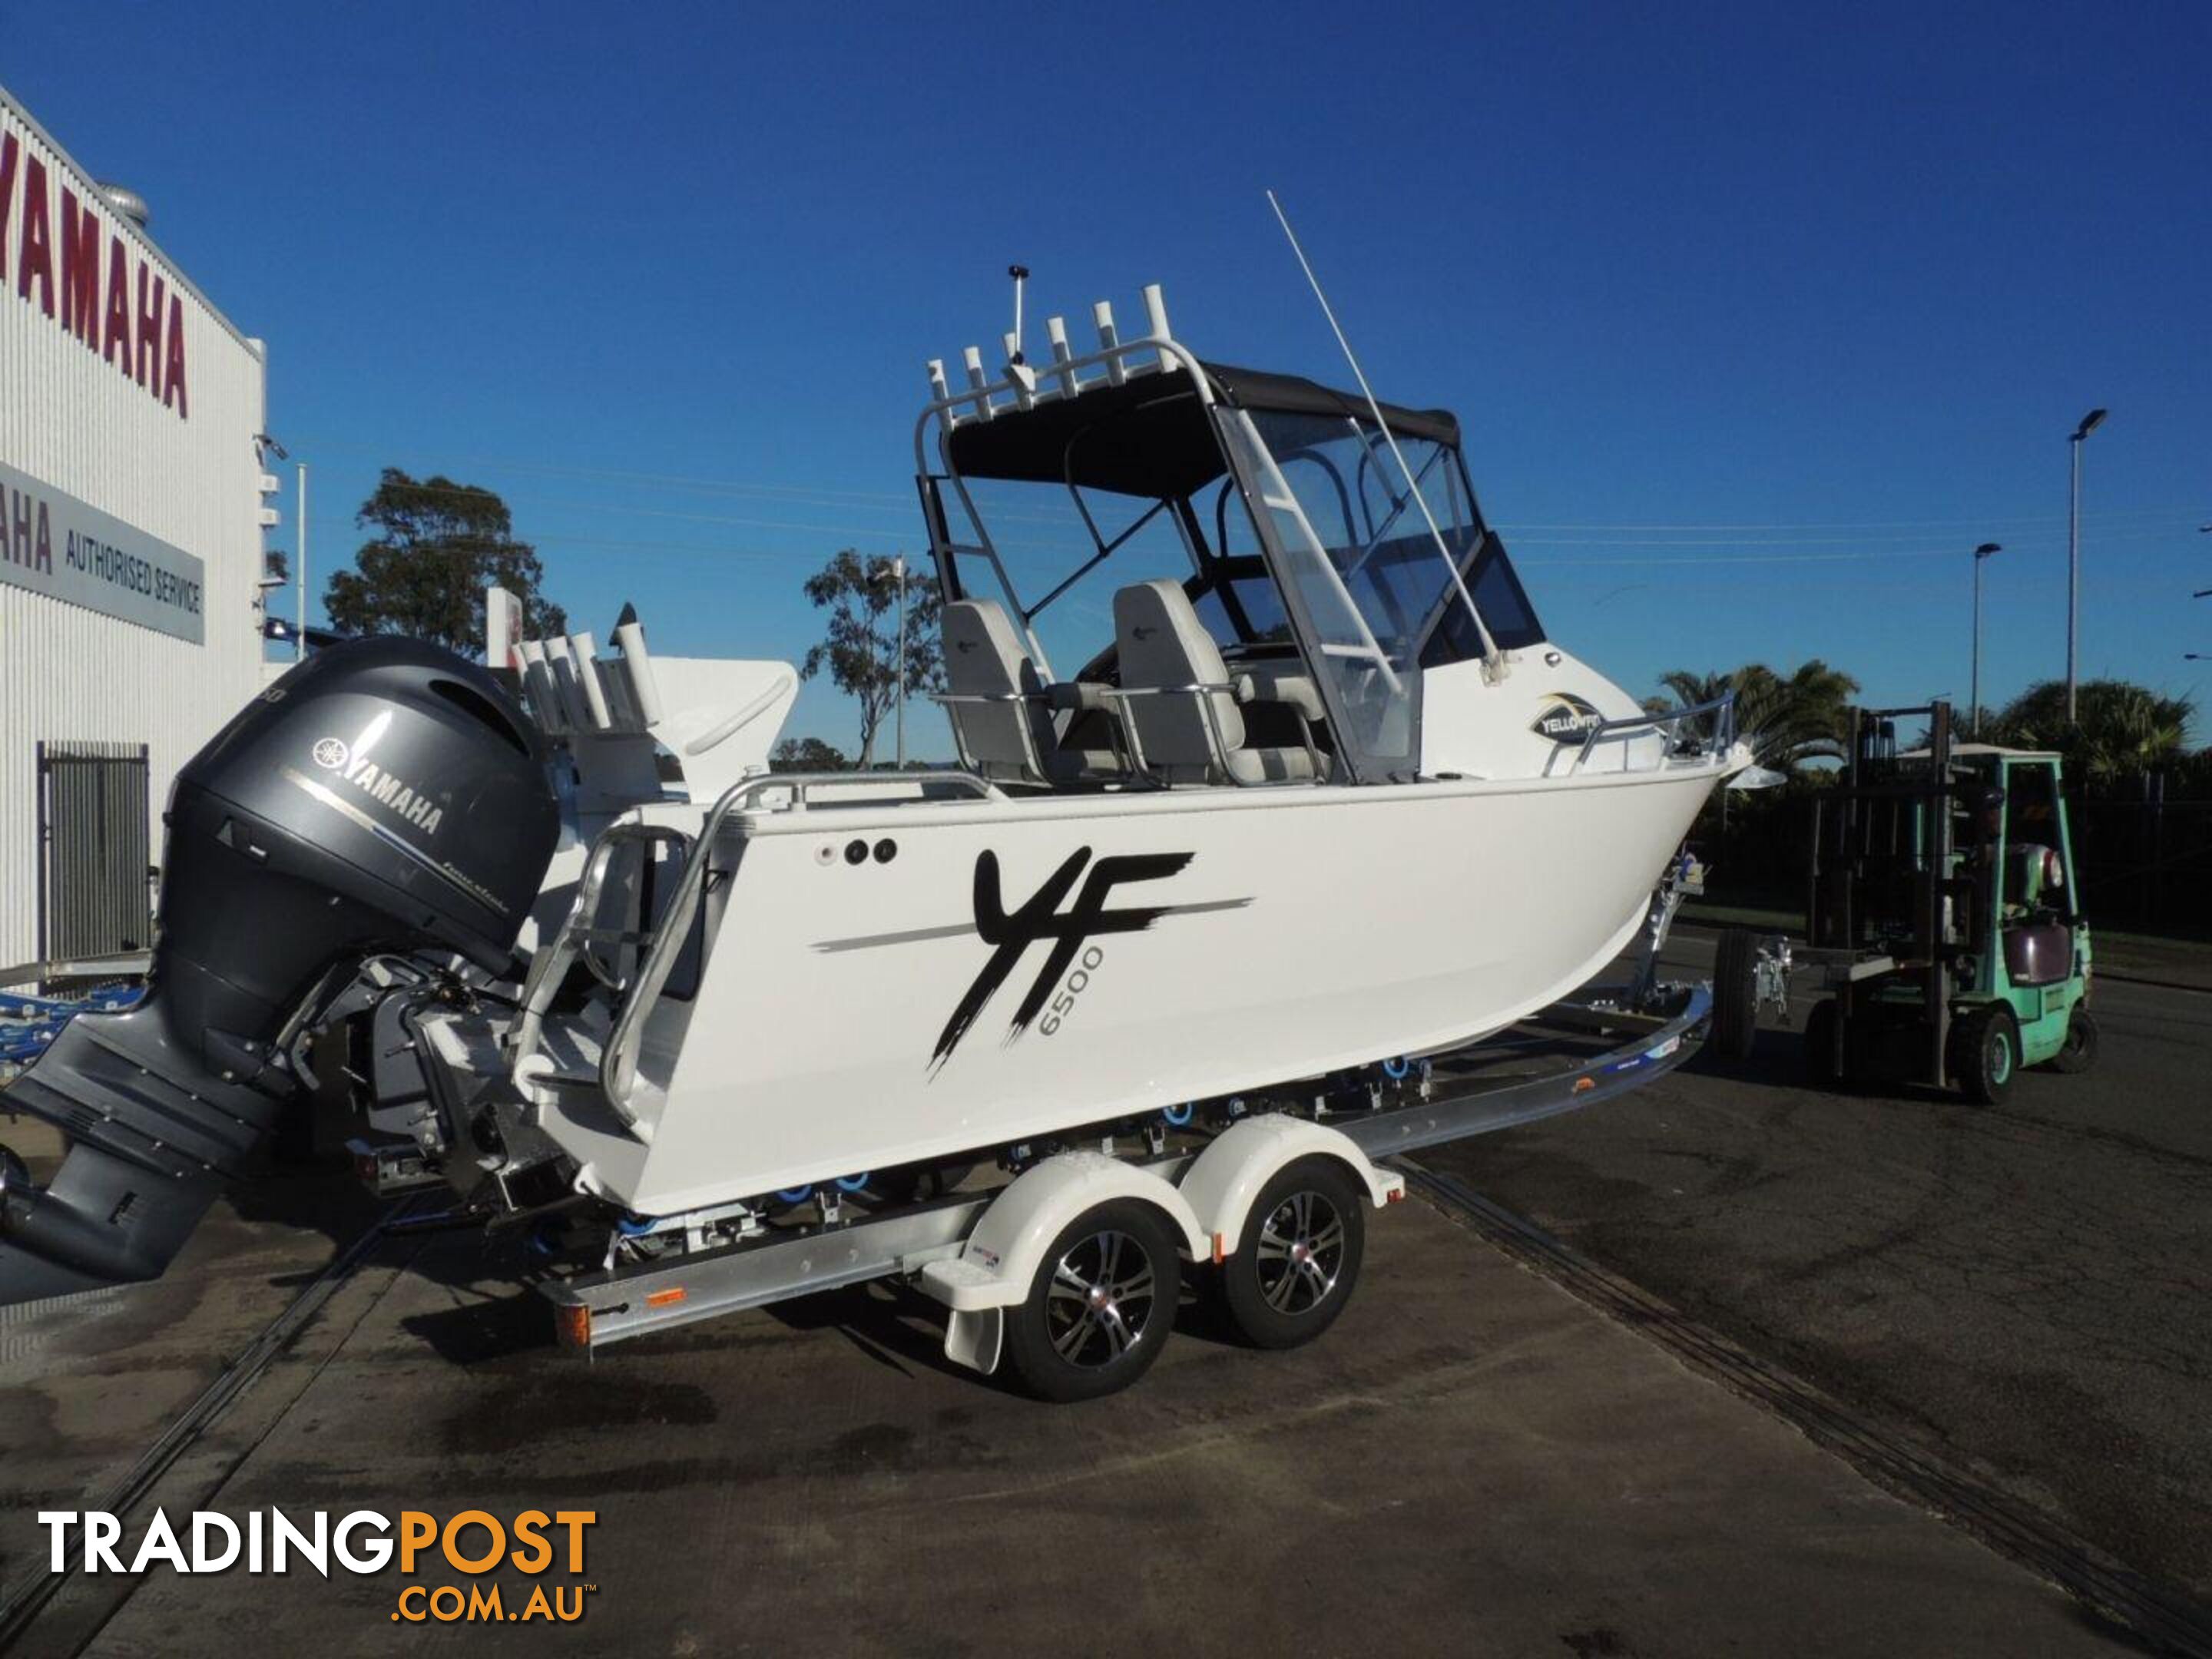 Yellowfin 6200 Soft Top Cabin + Yamaha F150hp 4-Stroke - Pack 2 for sale online prices